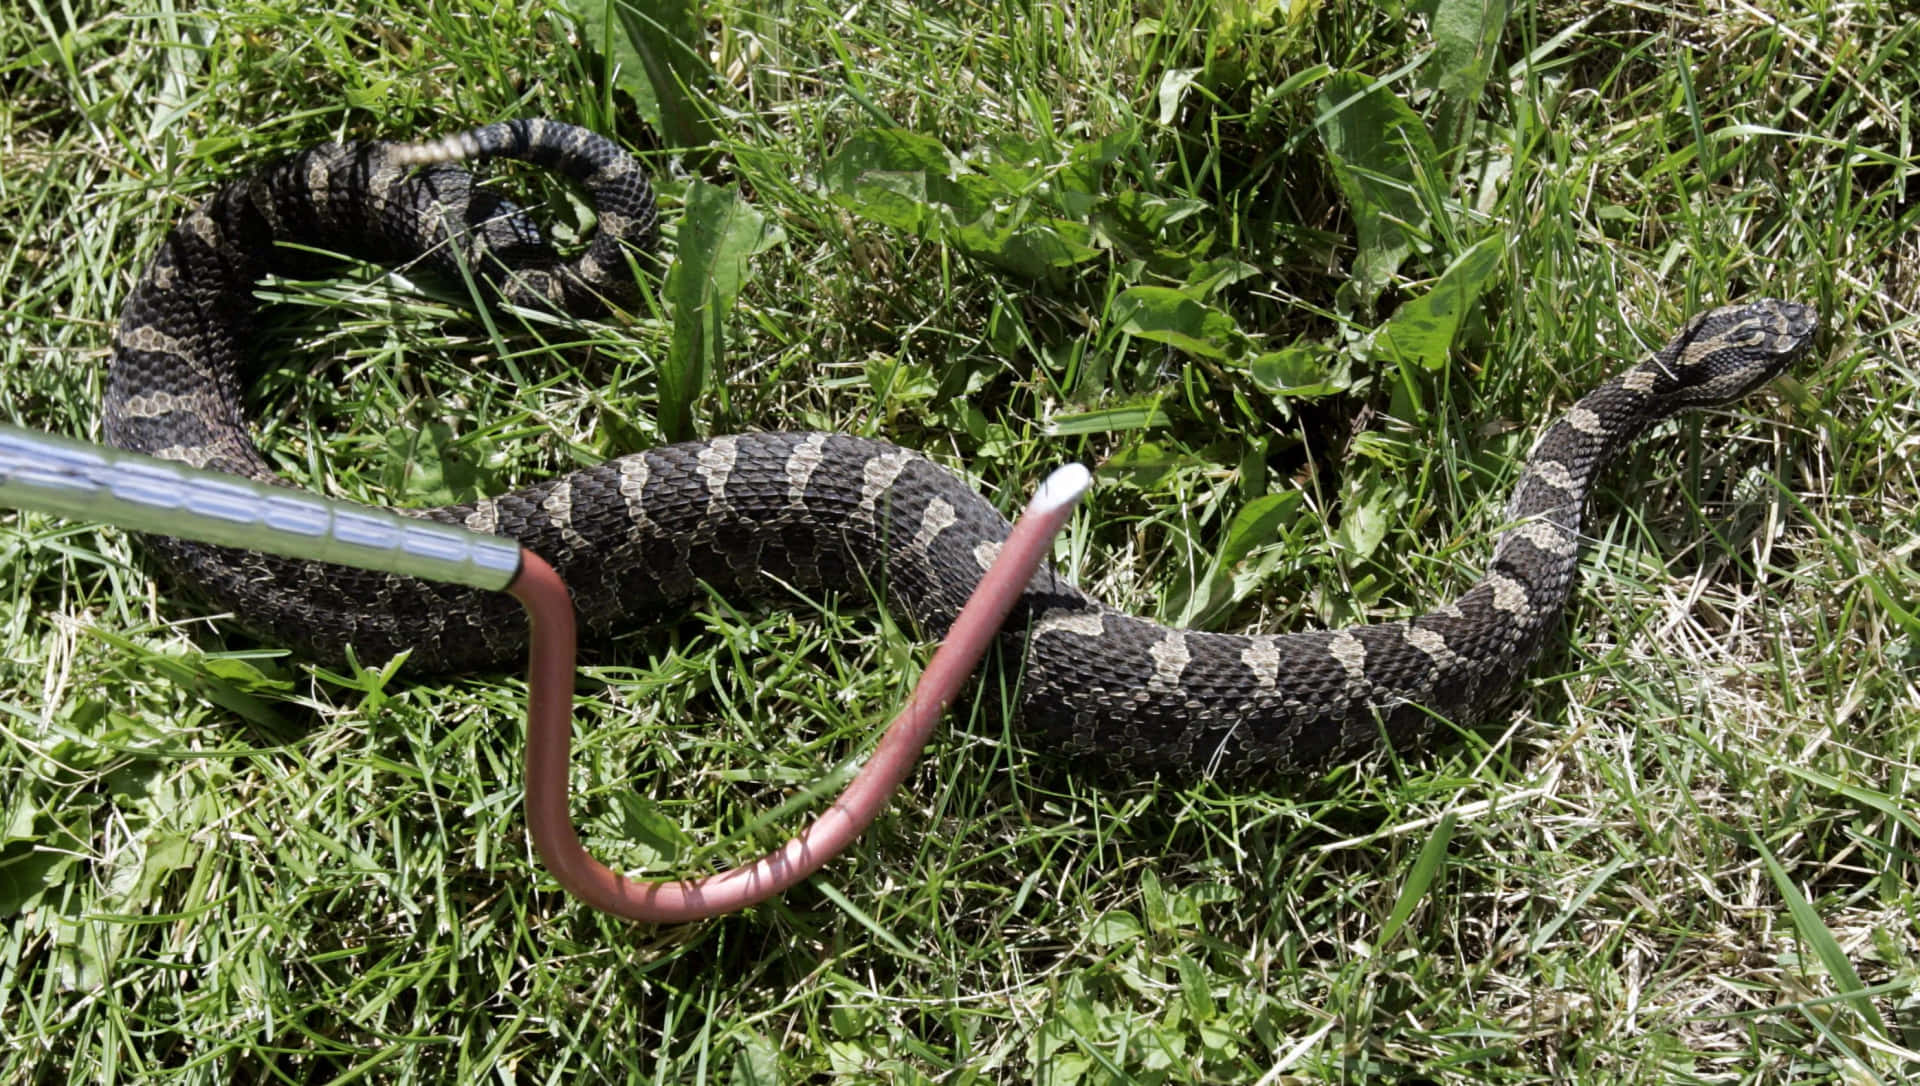 Keep a lookout for Michigan's slippery snakes!